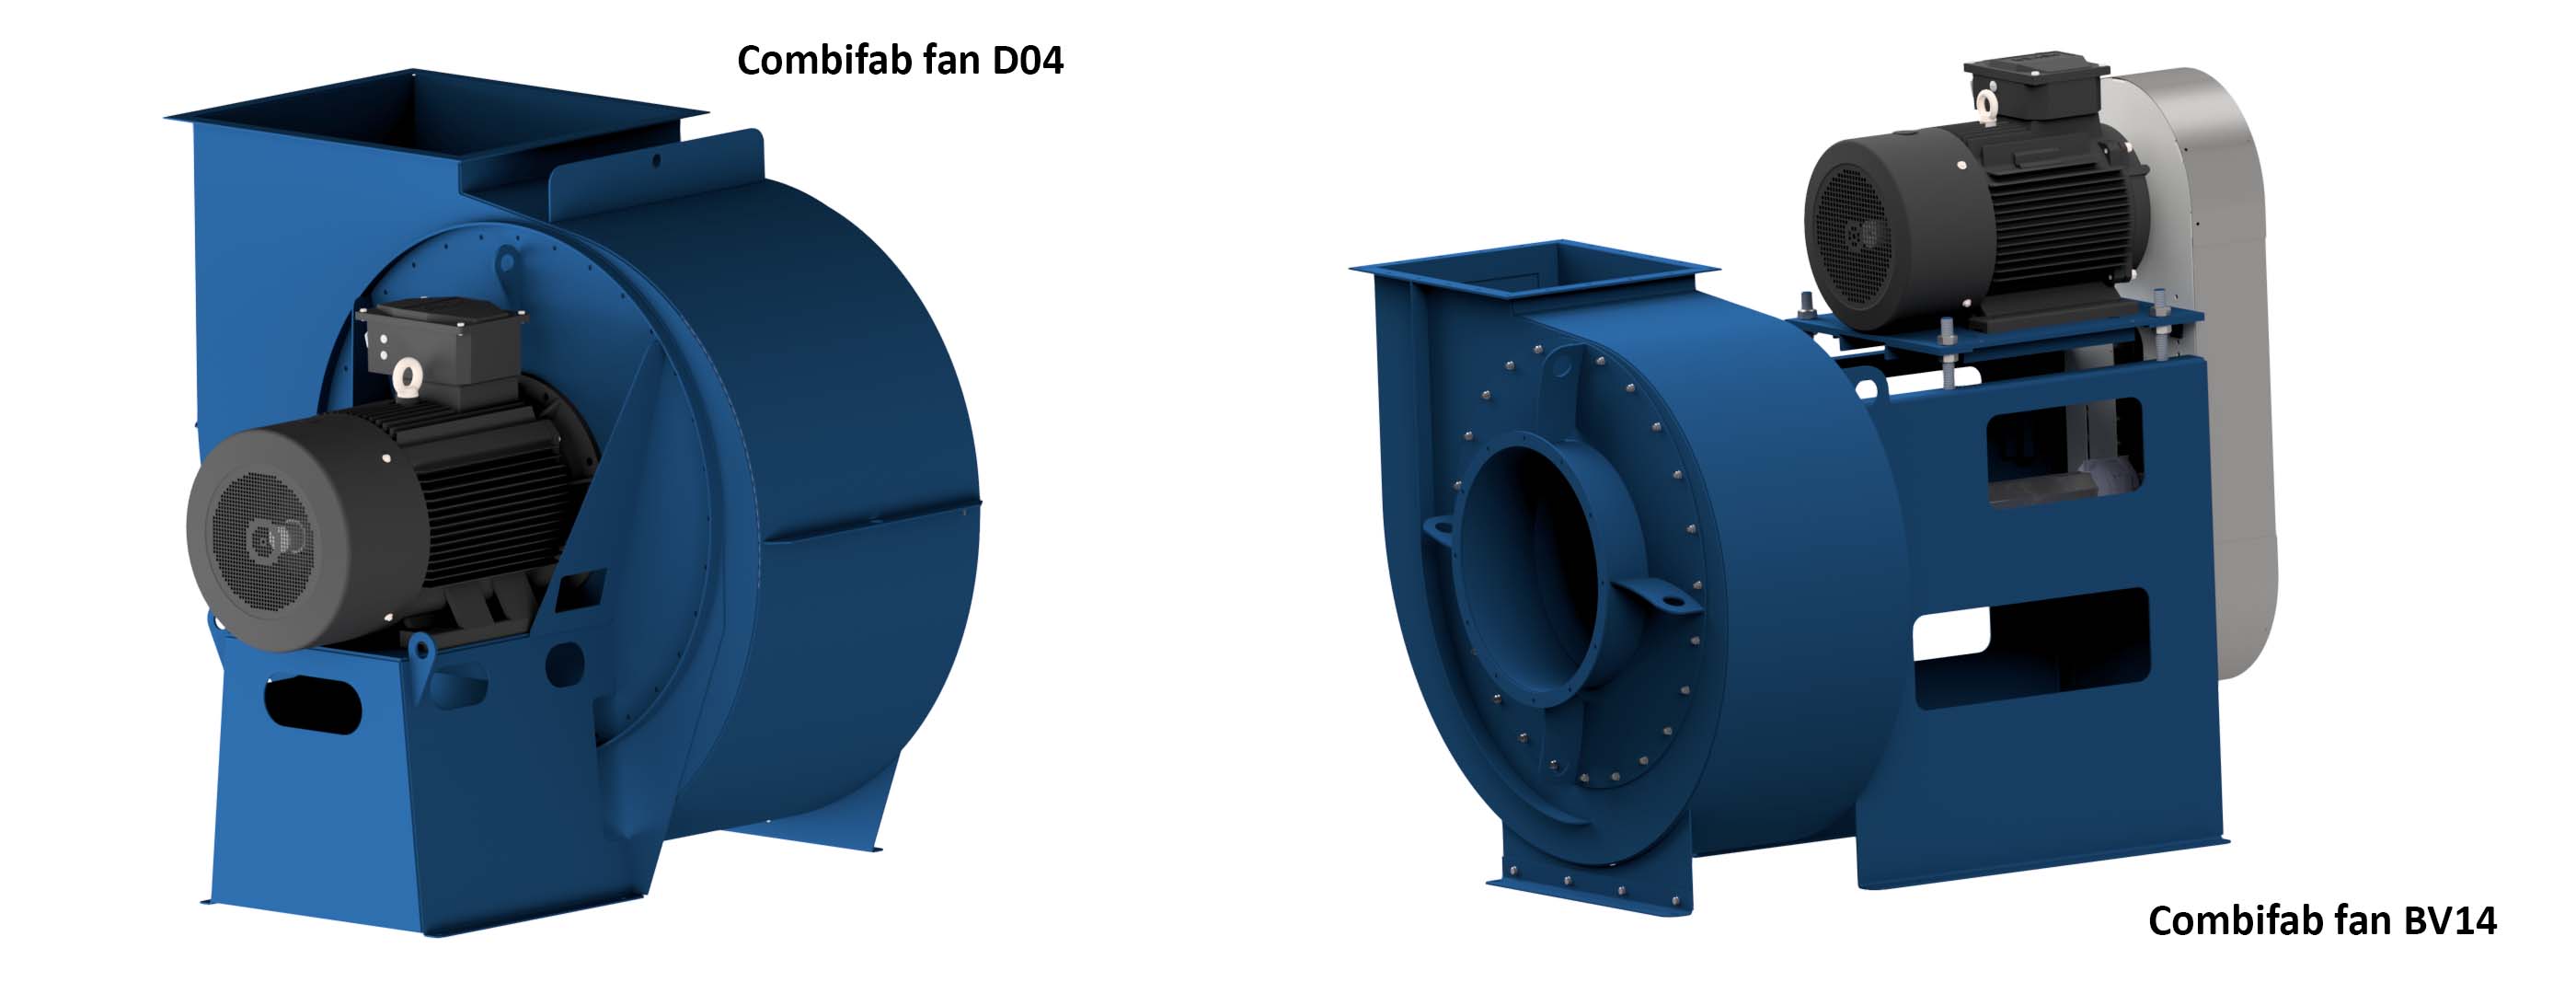 Combifab Fans and Blowers